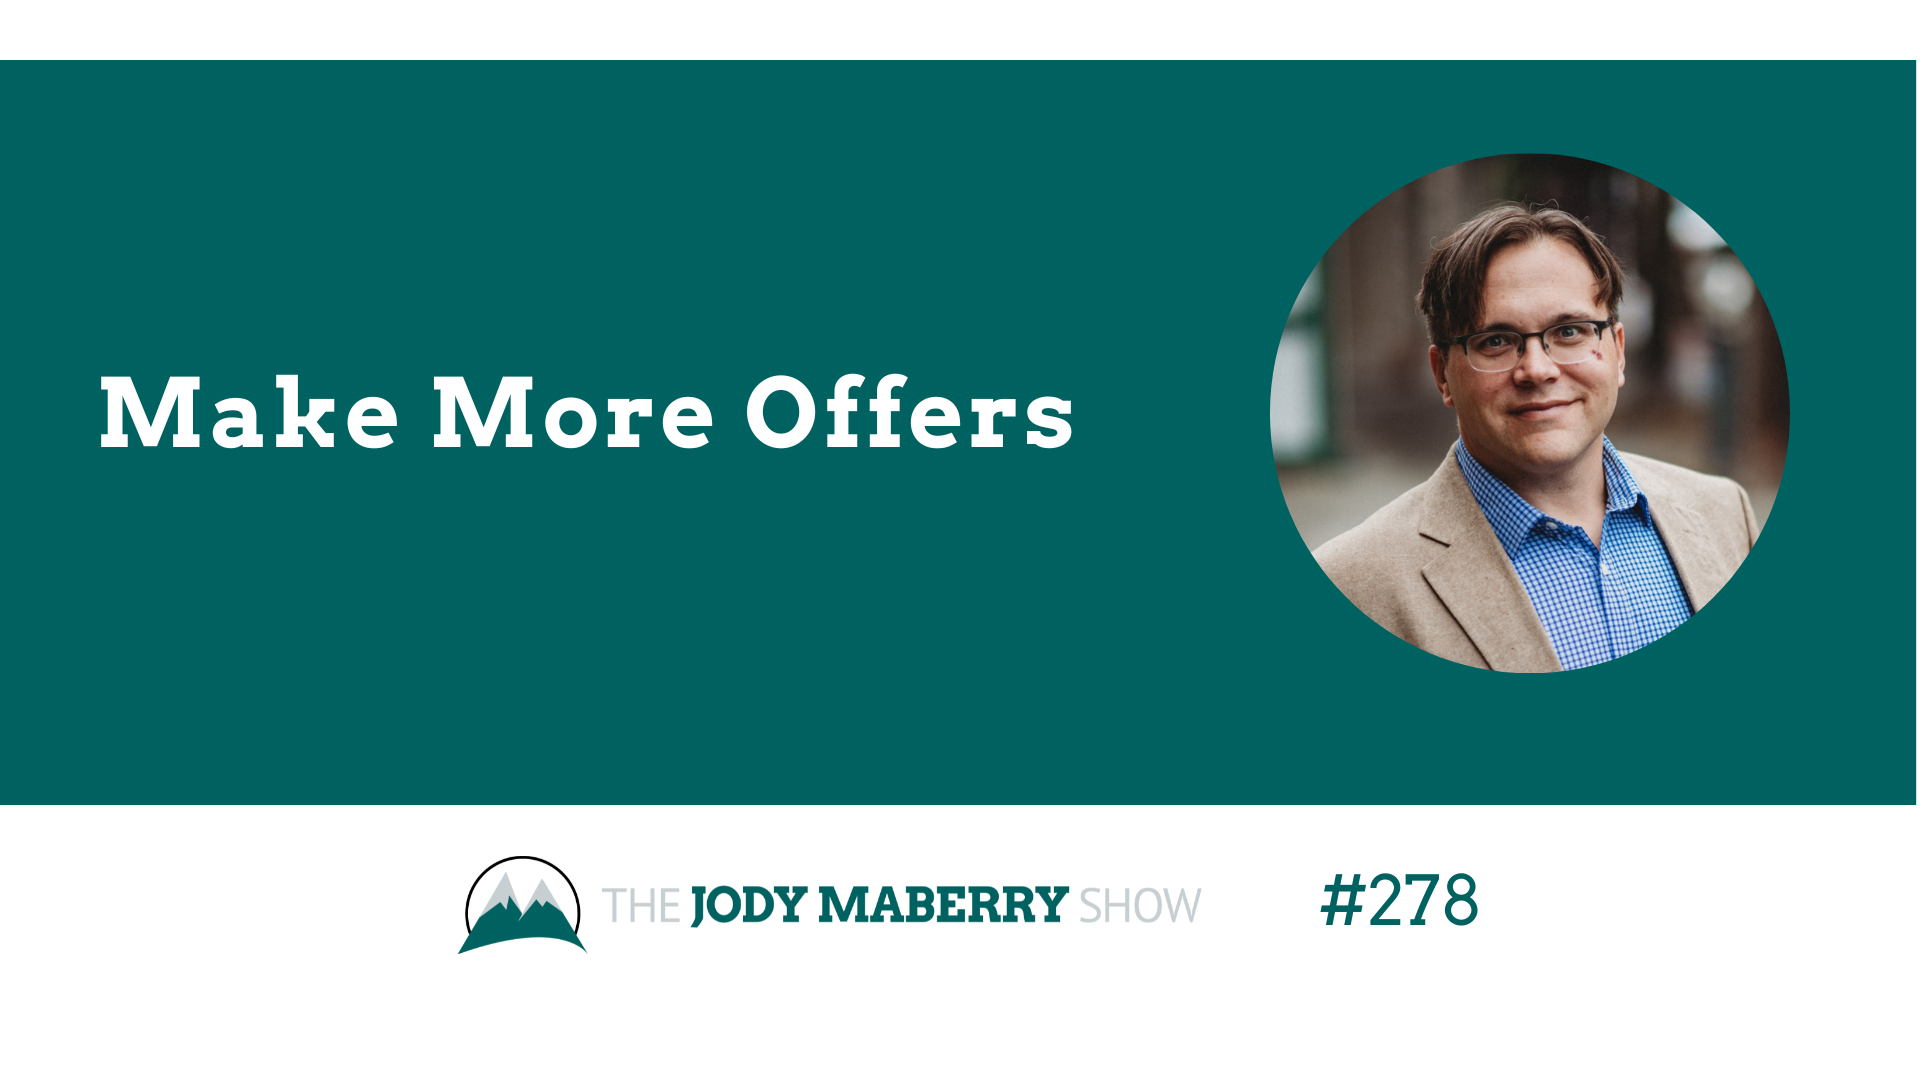 Jody Maberry Show Episode 278 Make More Offers